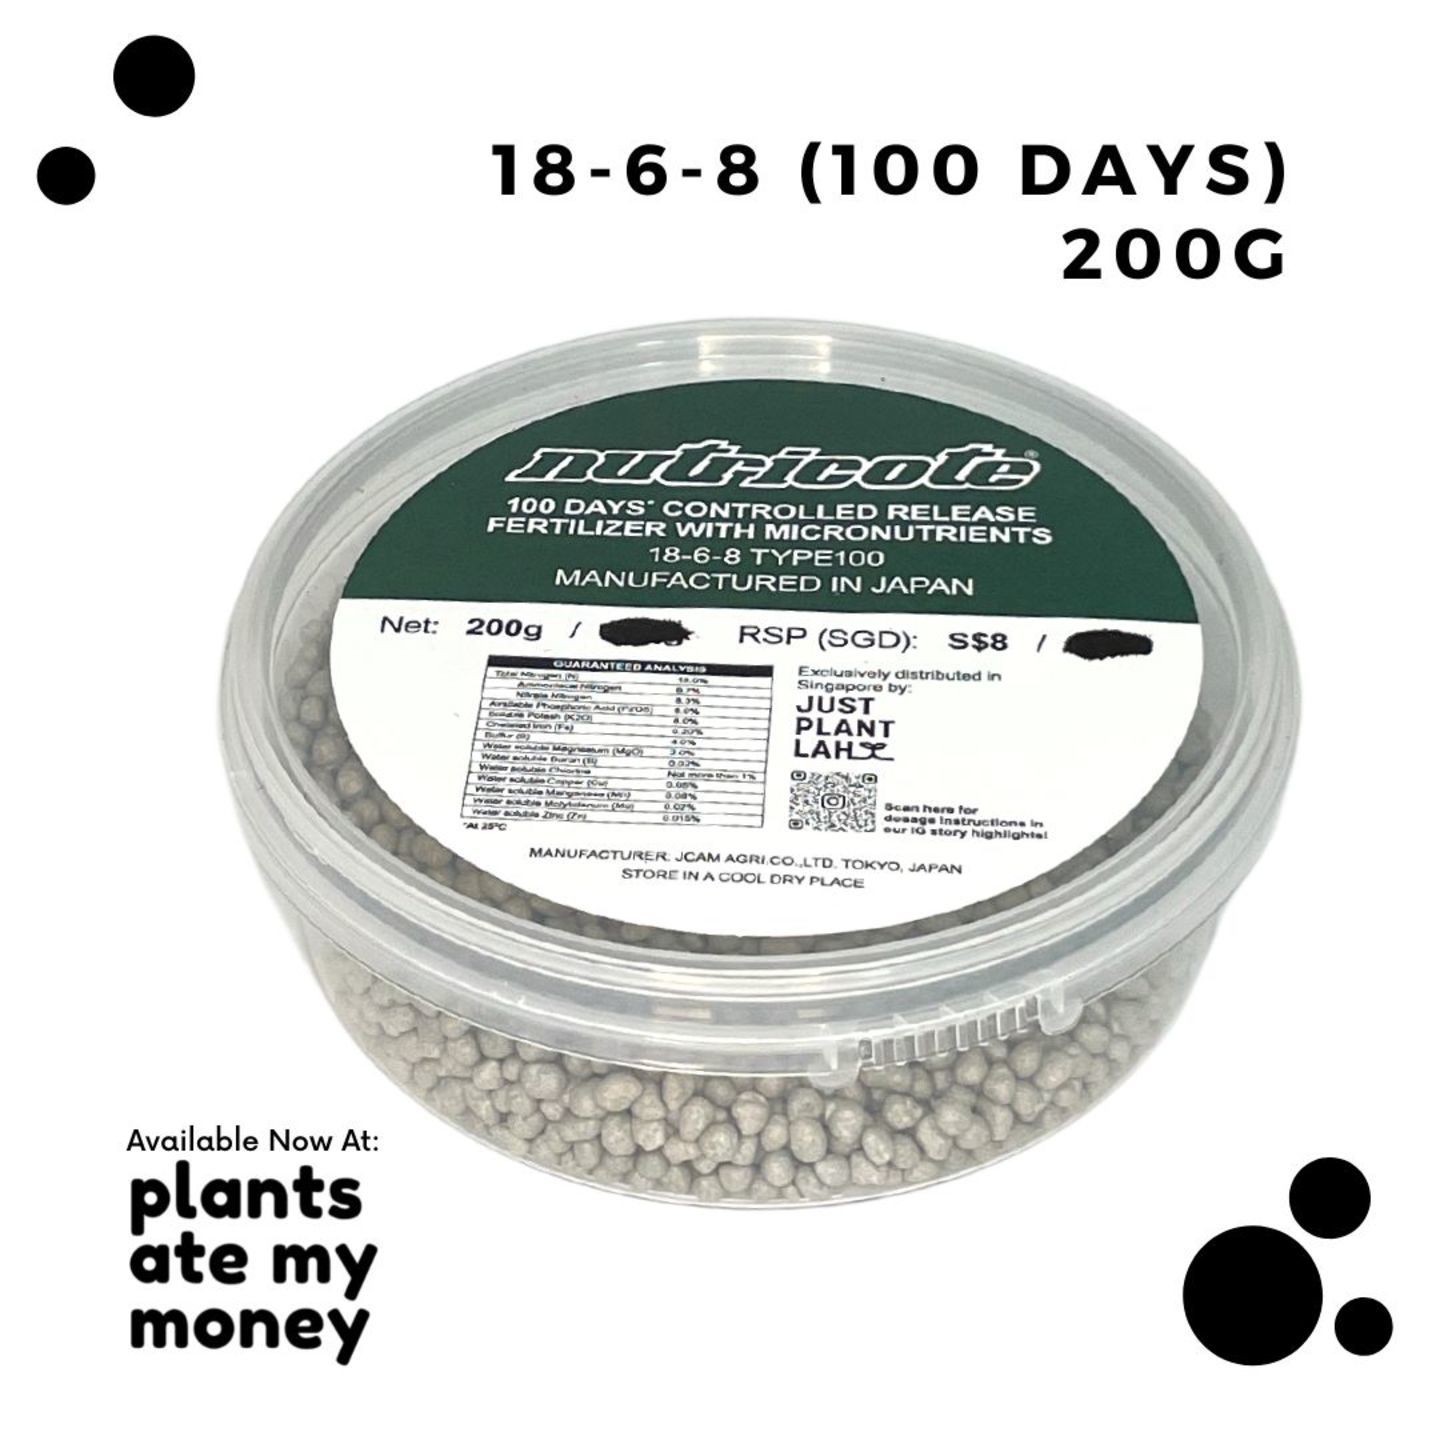 200g - 18-6-8 100 Days Nutricote Controlled Release Fertilizer with Micronutrients